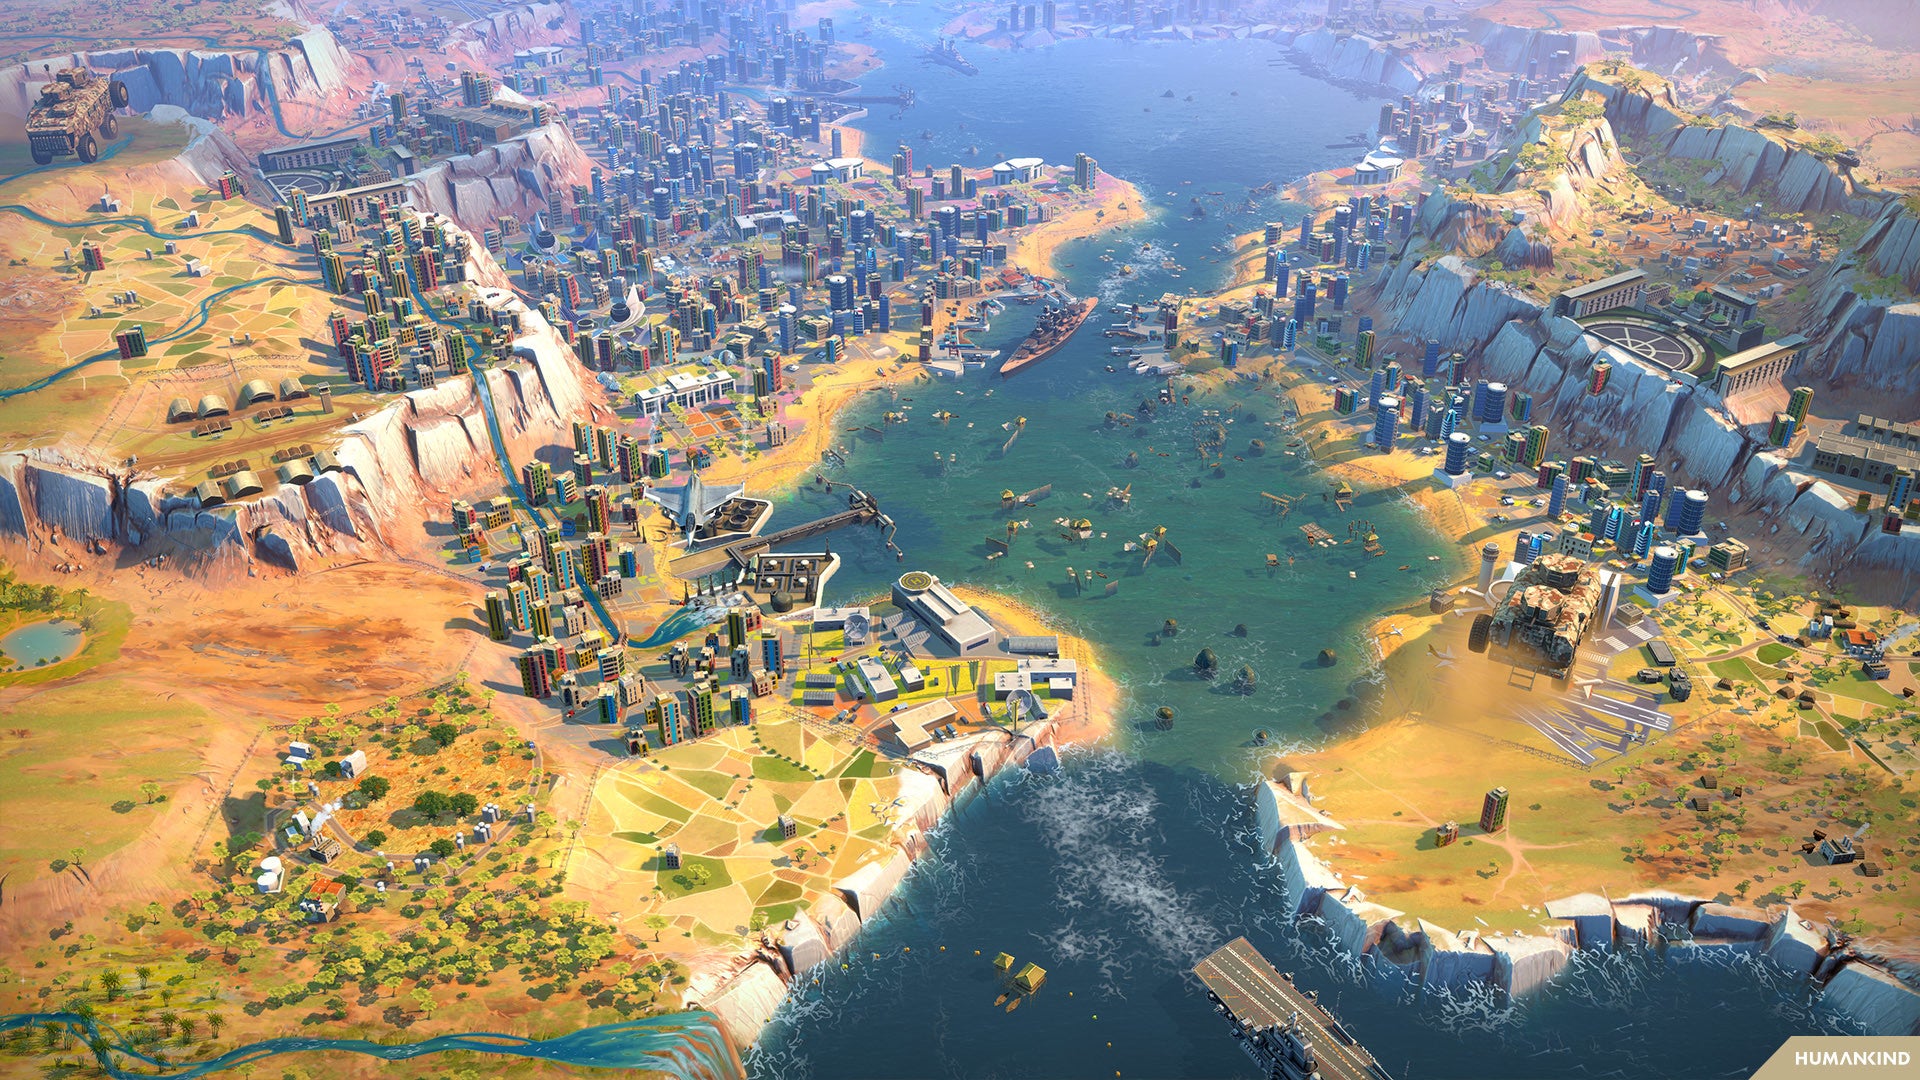 A large contemporary city in a screenshot of Humankind's Cultures of Africa Pack.